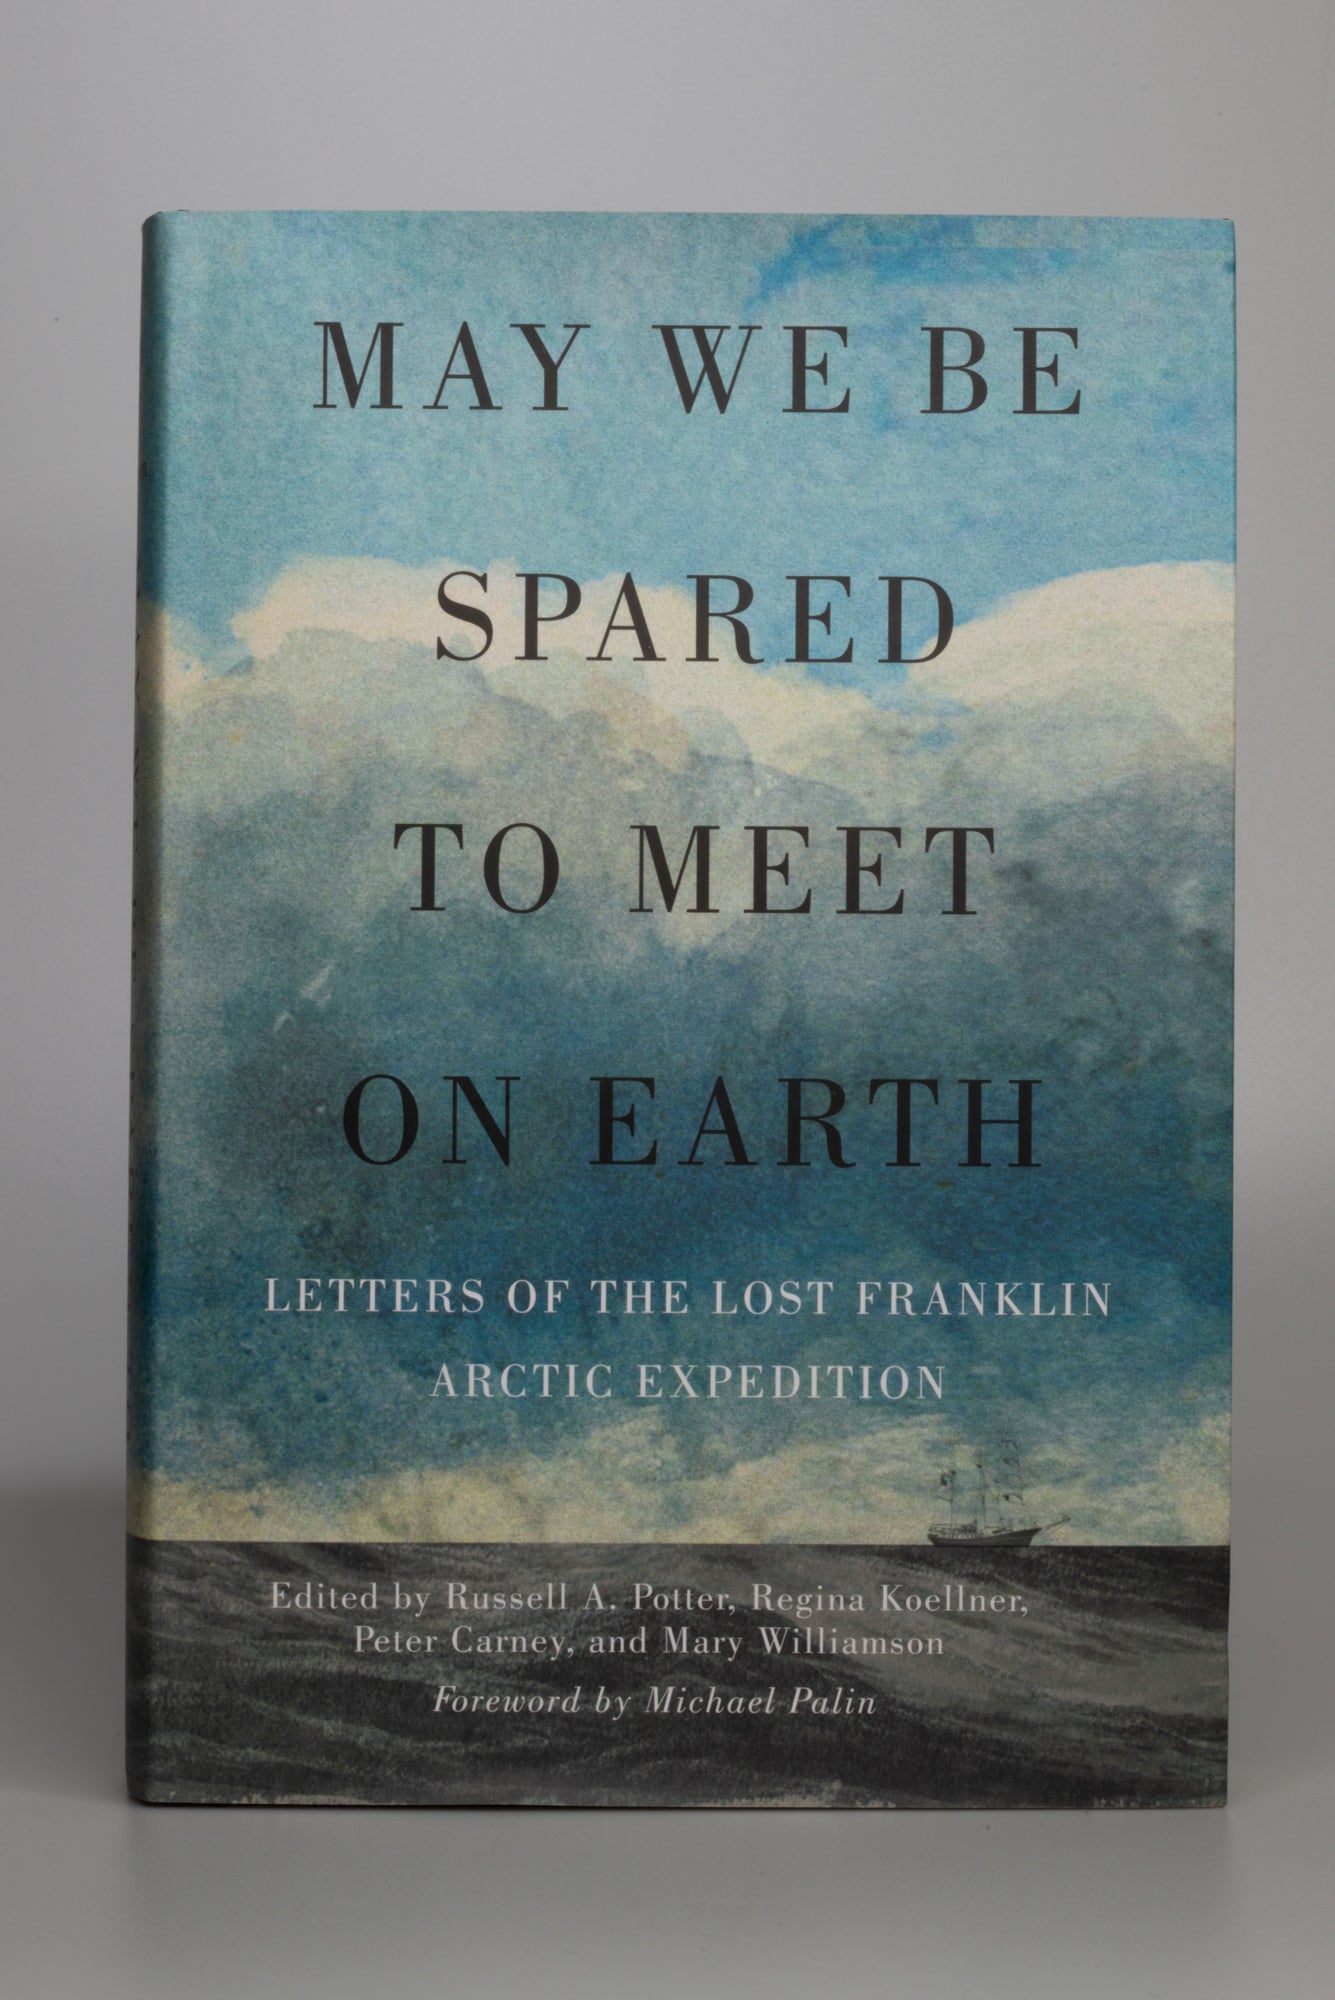 May We Be Spared to Meet on Earth. Letters of the Lost Franklin Arctic Expedition.